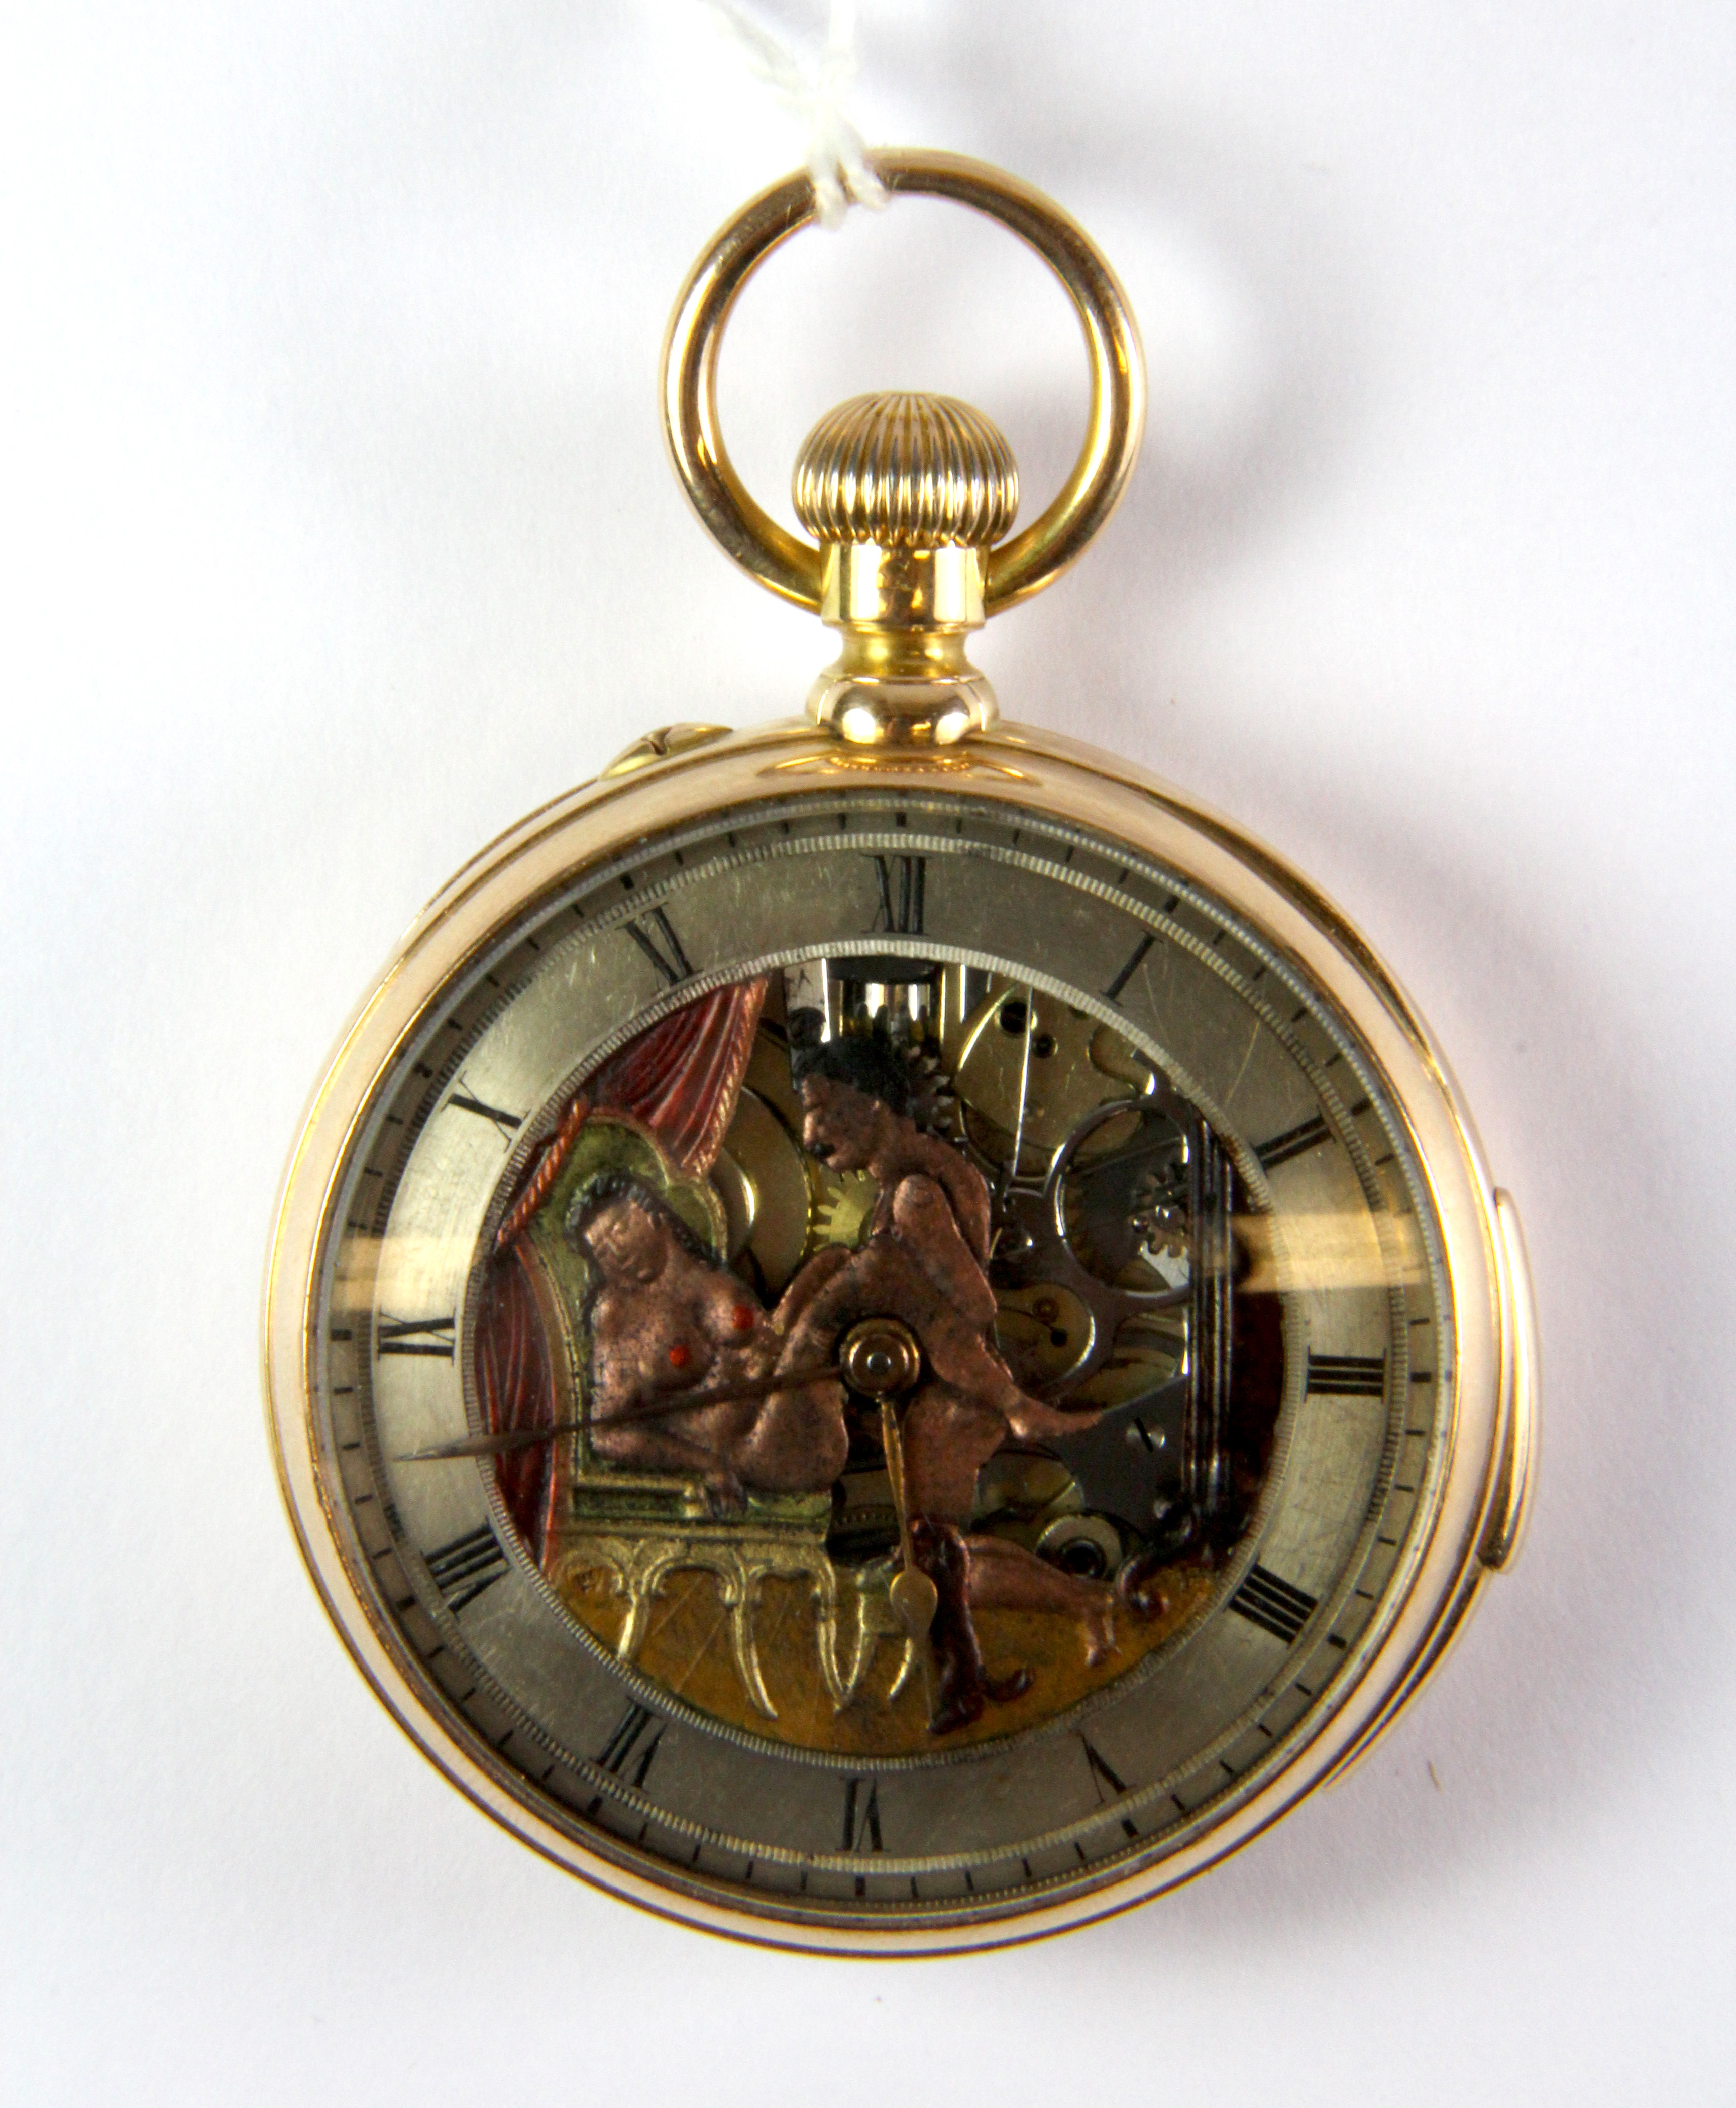 An unusual erotic action French open faced gold plated pocket watch with top wind movement.